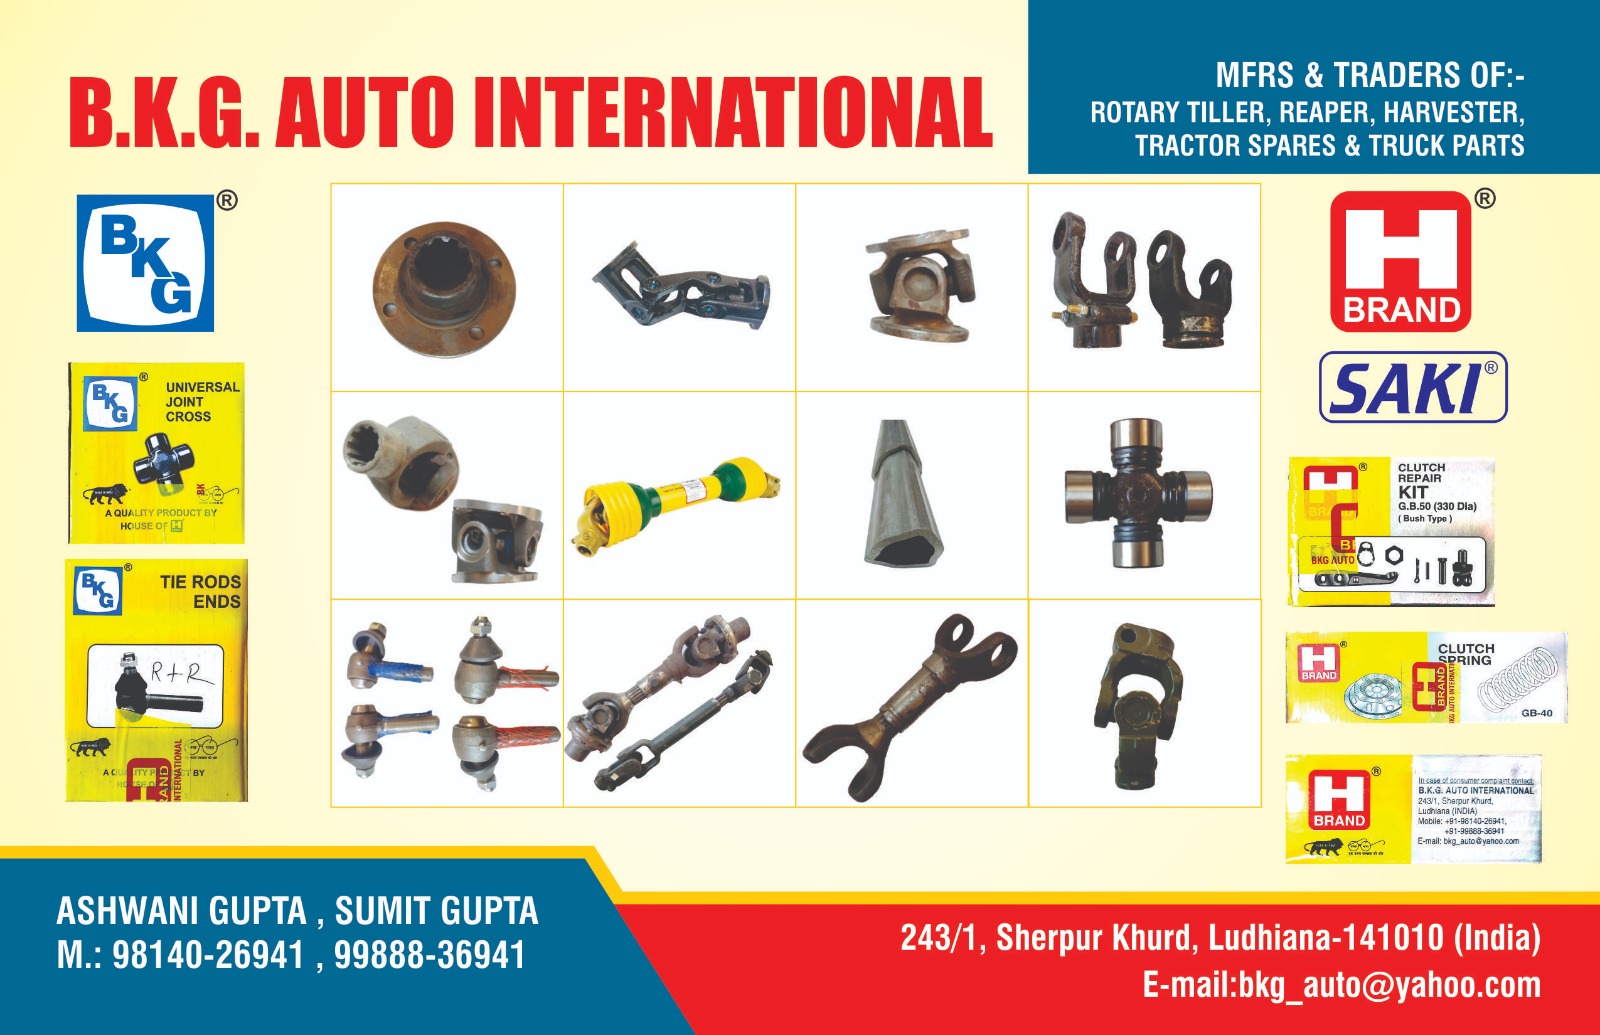 BKG Auto International leading manufacturers Harvester Combine parts, Straw Reaper parts, Thresher parts & Rotary Tillers spare parts Ludhiana Punjab